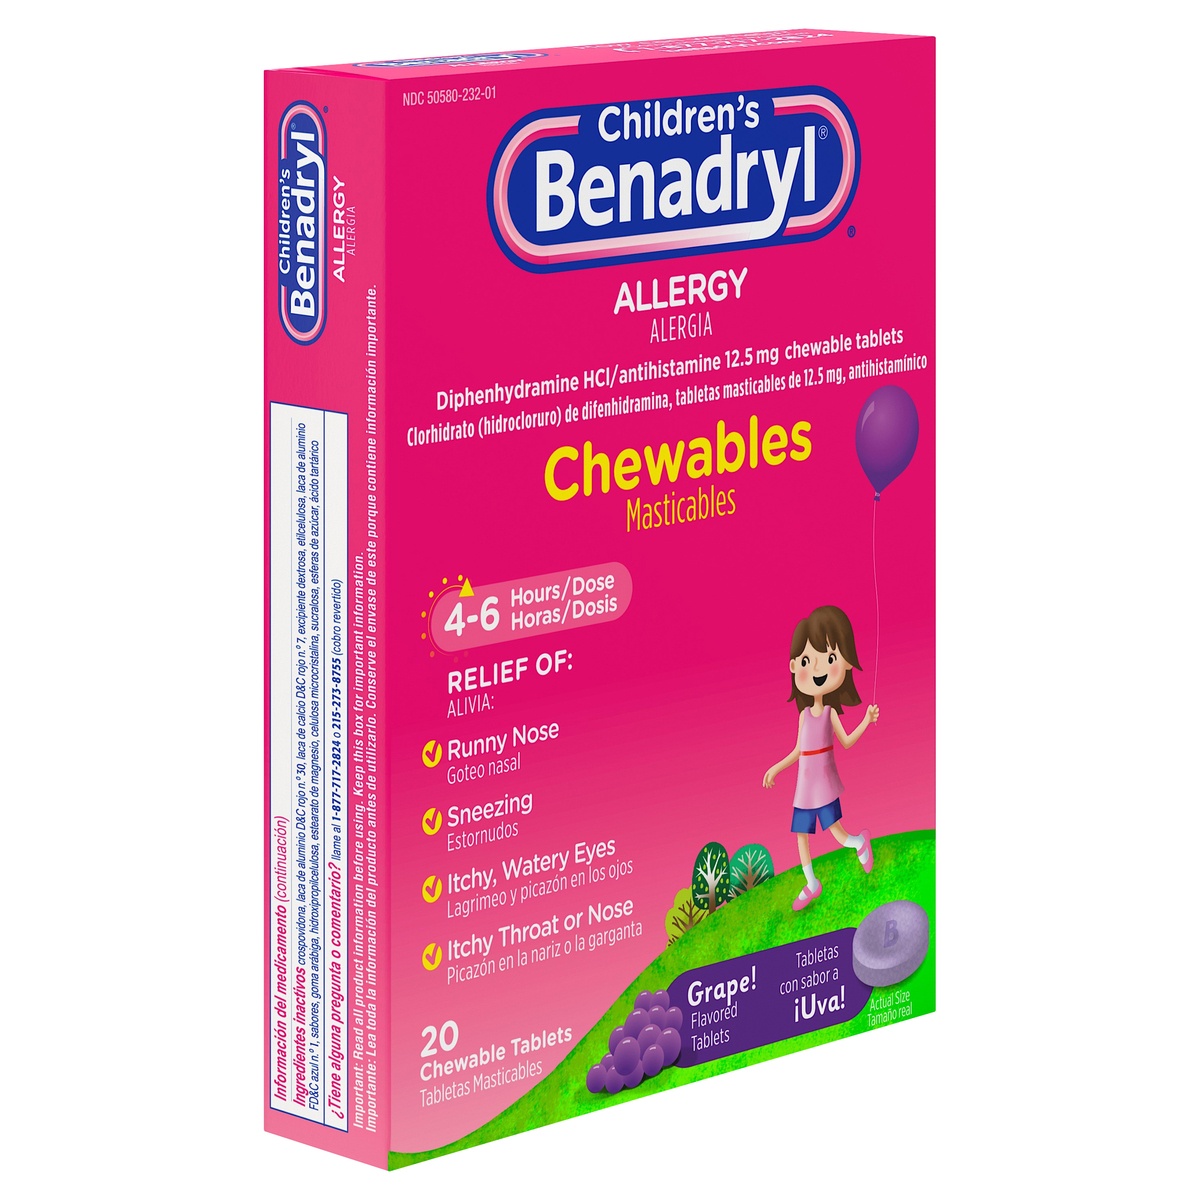 slide 2 of 5, Benadryl Allergy Chewables with Diphenhydramine HCl, Antihistamine Chewable Tablets For Relief of Allergy Symptoms Like Sneezing, Itchy Eyes, & More, Grape Flavor, 20 ct